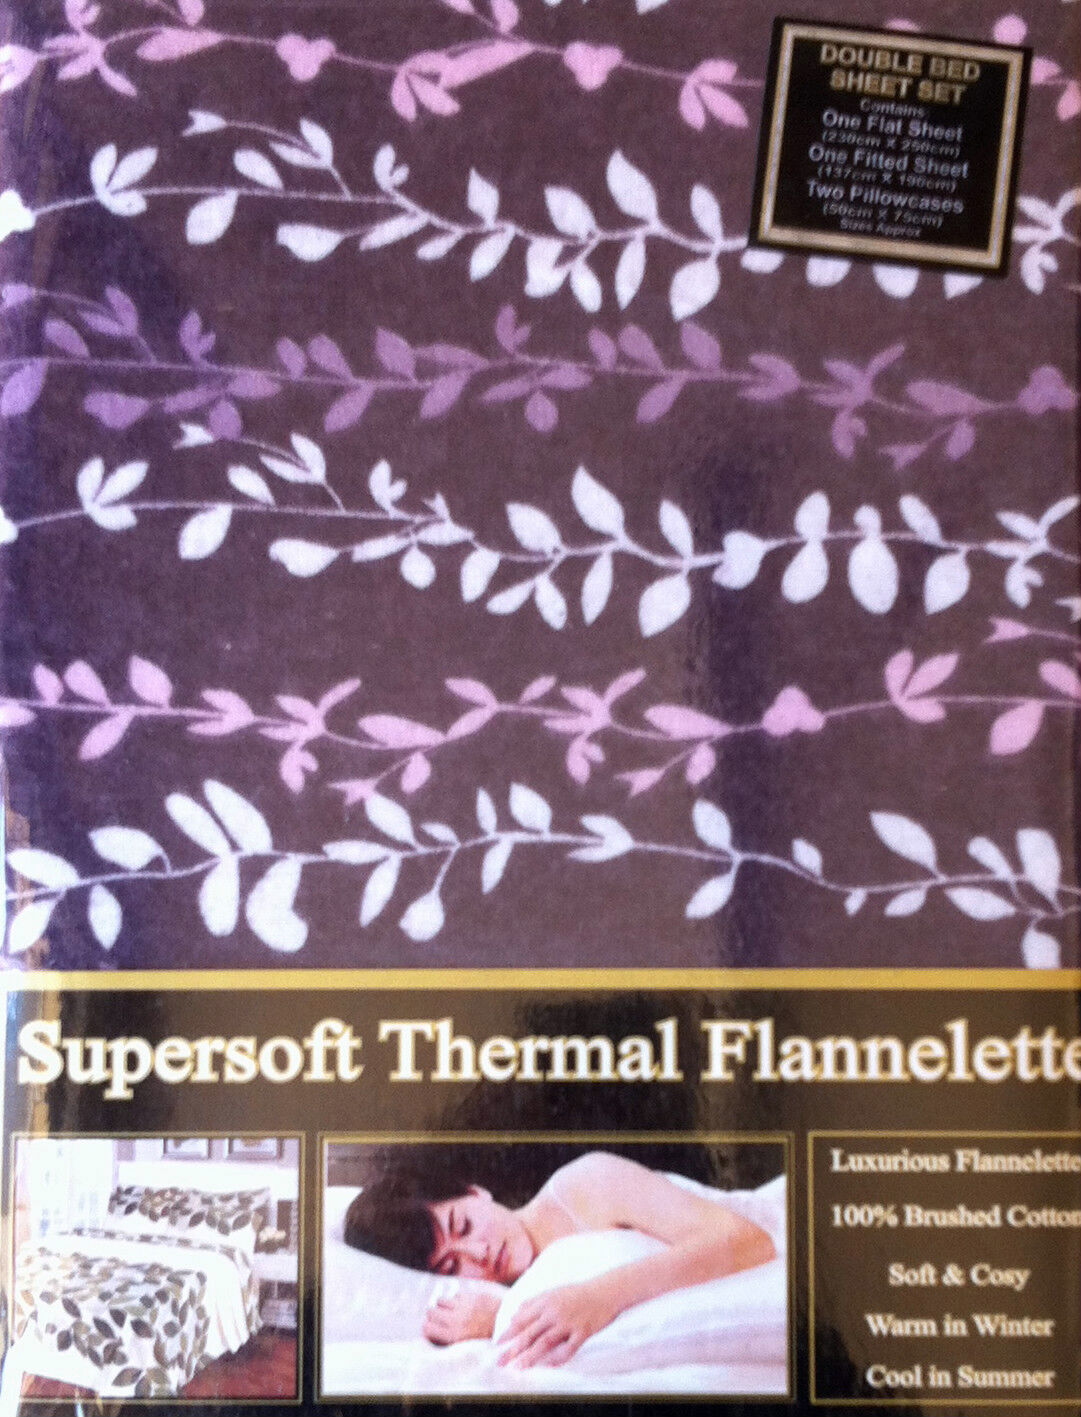 Double Bed Flannelette Sheet Set Aubergine Plum Leaves 100% Brushed Cotton Luxury